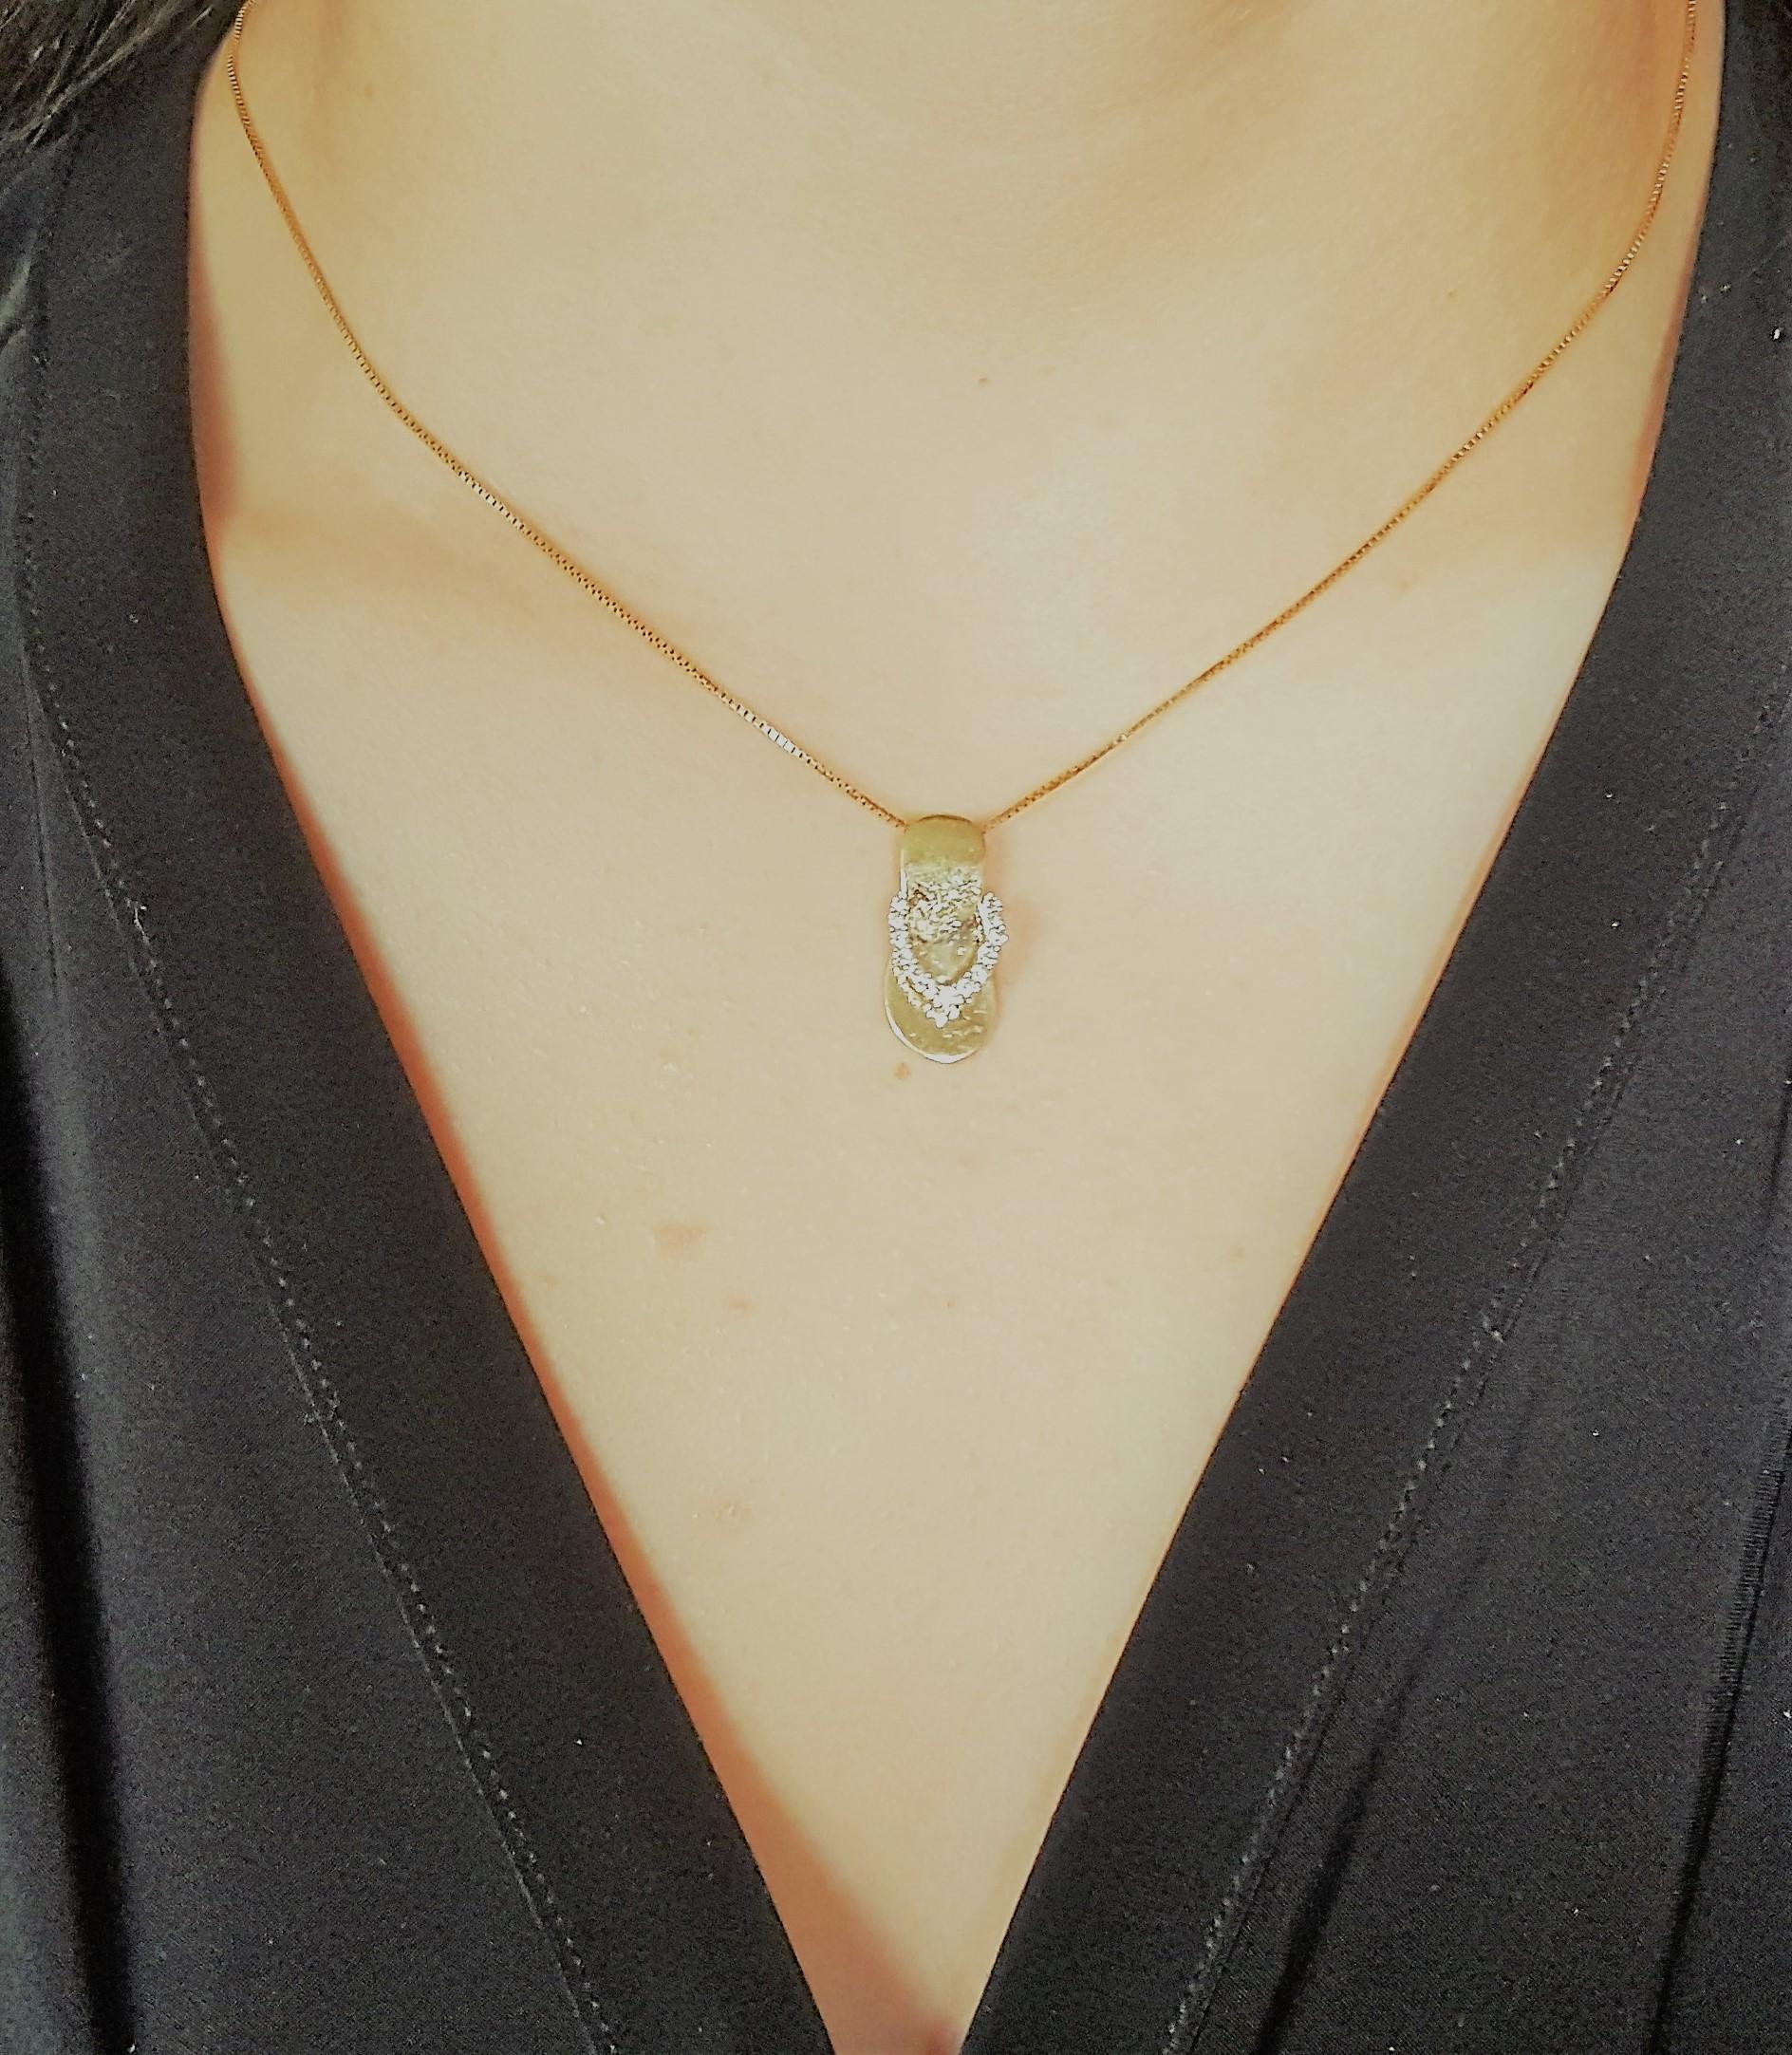 14kt Yellow Gold Diamond Hawaiian Flip Flop Pendant, 2.1 Grams, Very Good Condition, Approx. .15cttw Diamonds, Stamped 14k ADPG.
The diamonds are f/g in color and SI in clarity, set in four prong white gold settings.

Chains are sold separately. If